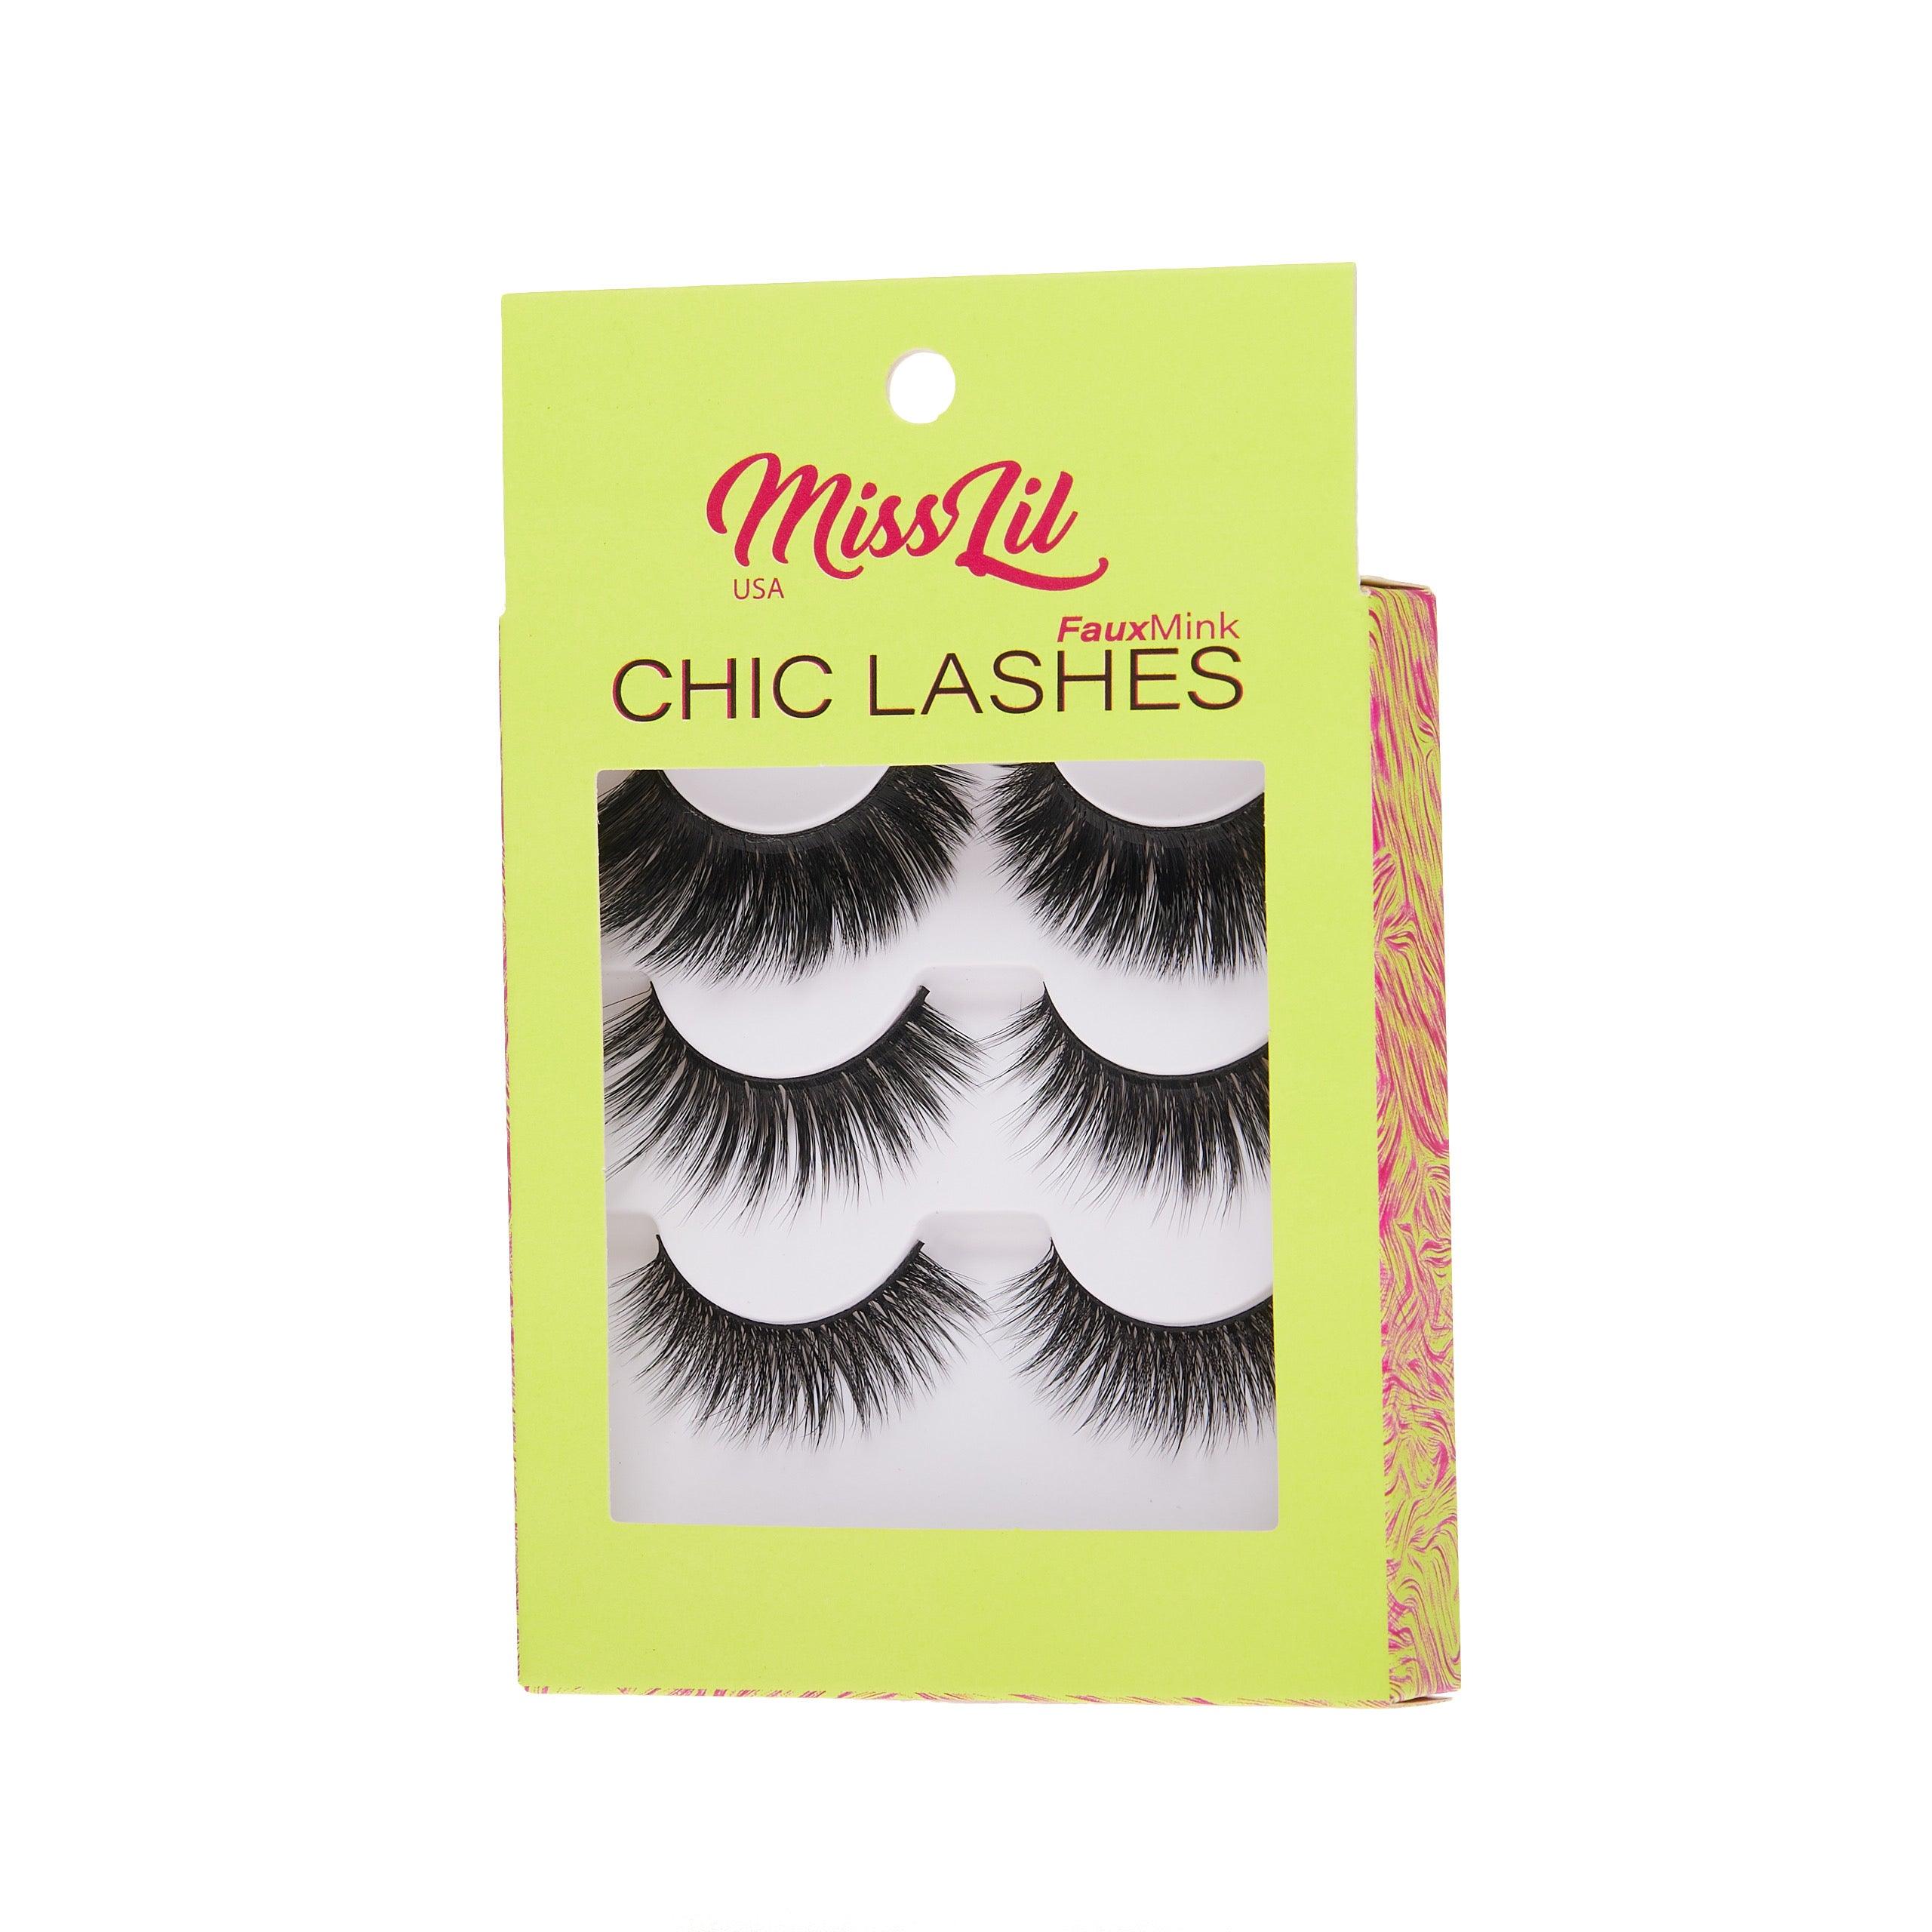 3-Pair Faux Mink Eyelashes - Chic Lashes Collection #15 - Pack of 3 - Miss Lil USA